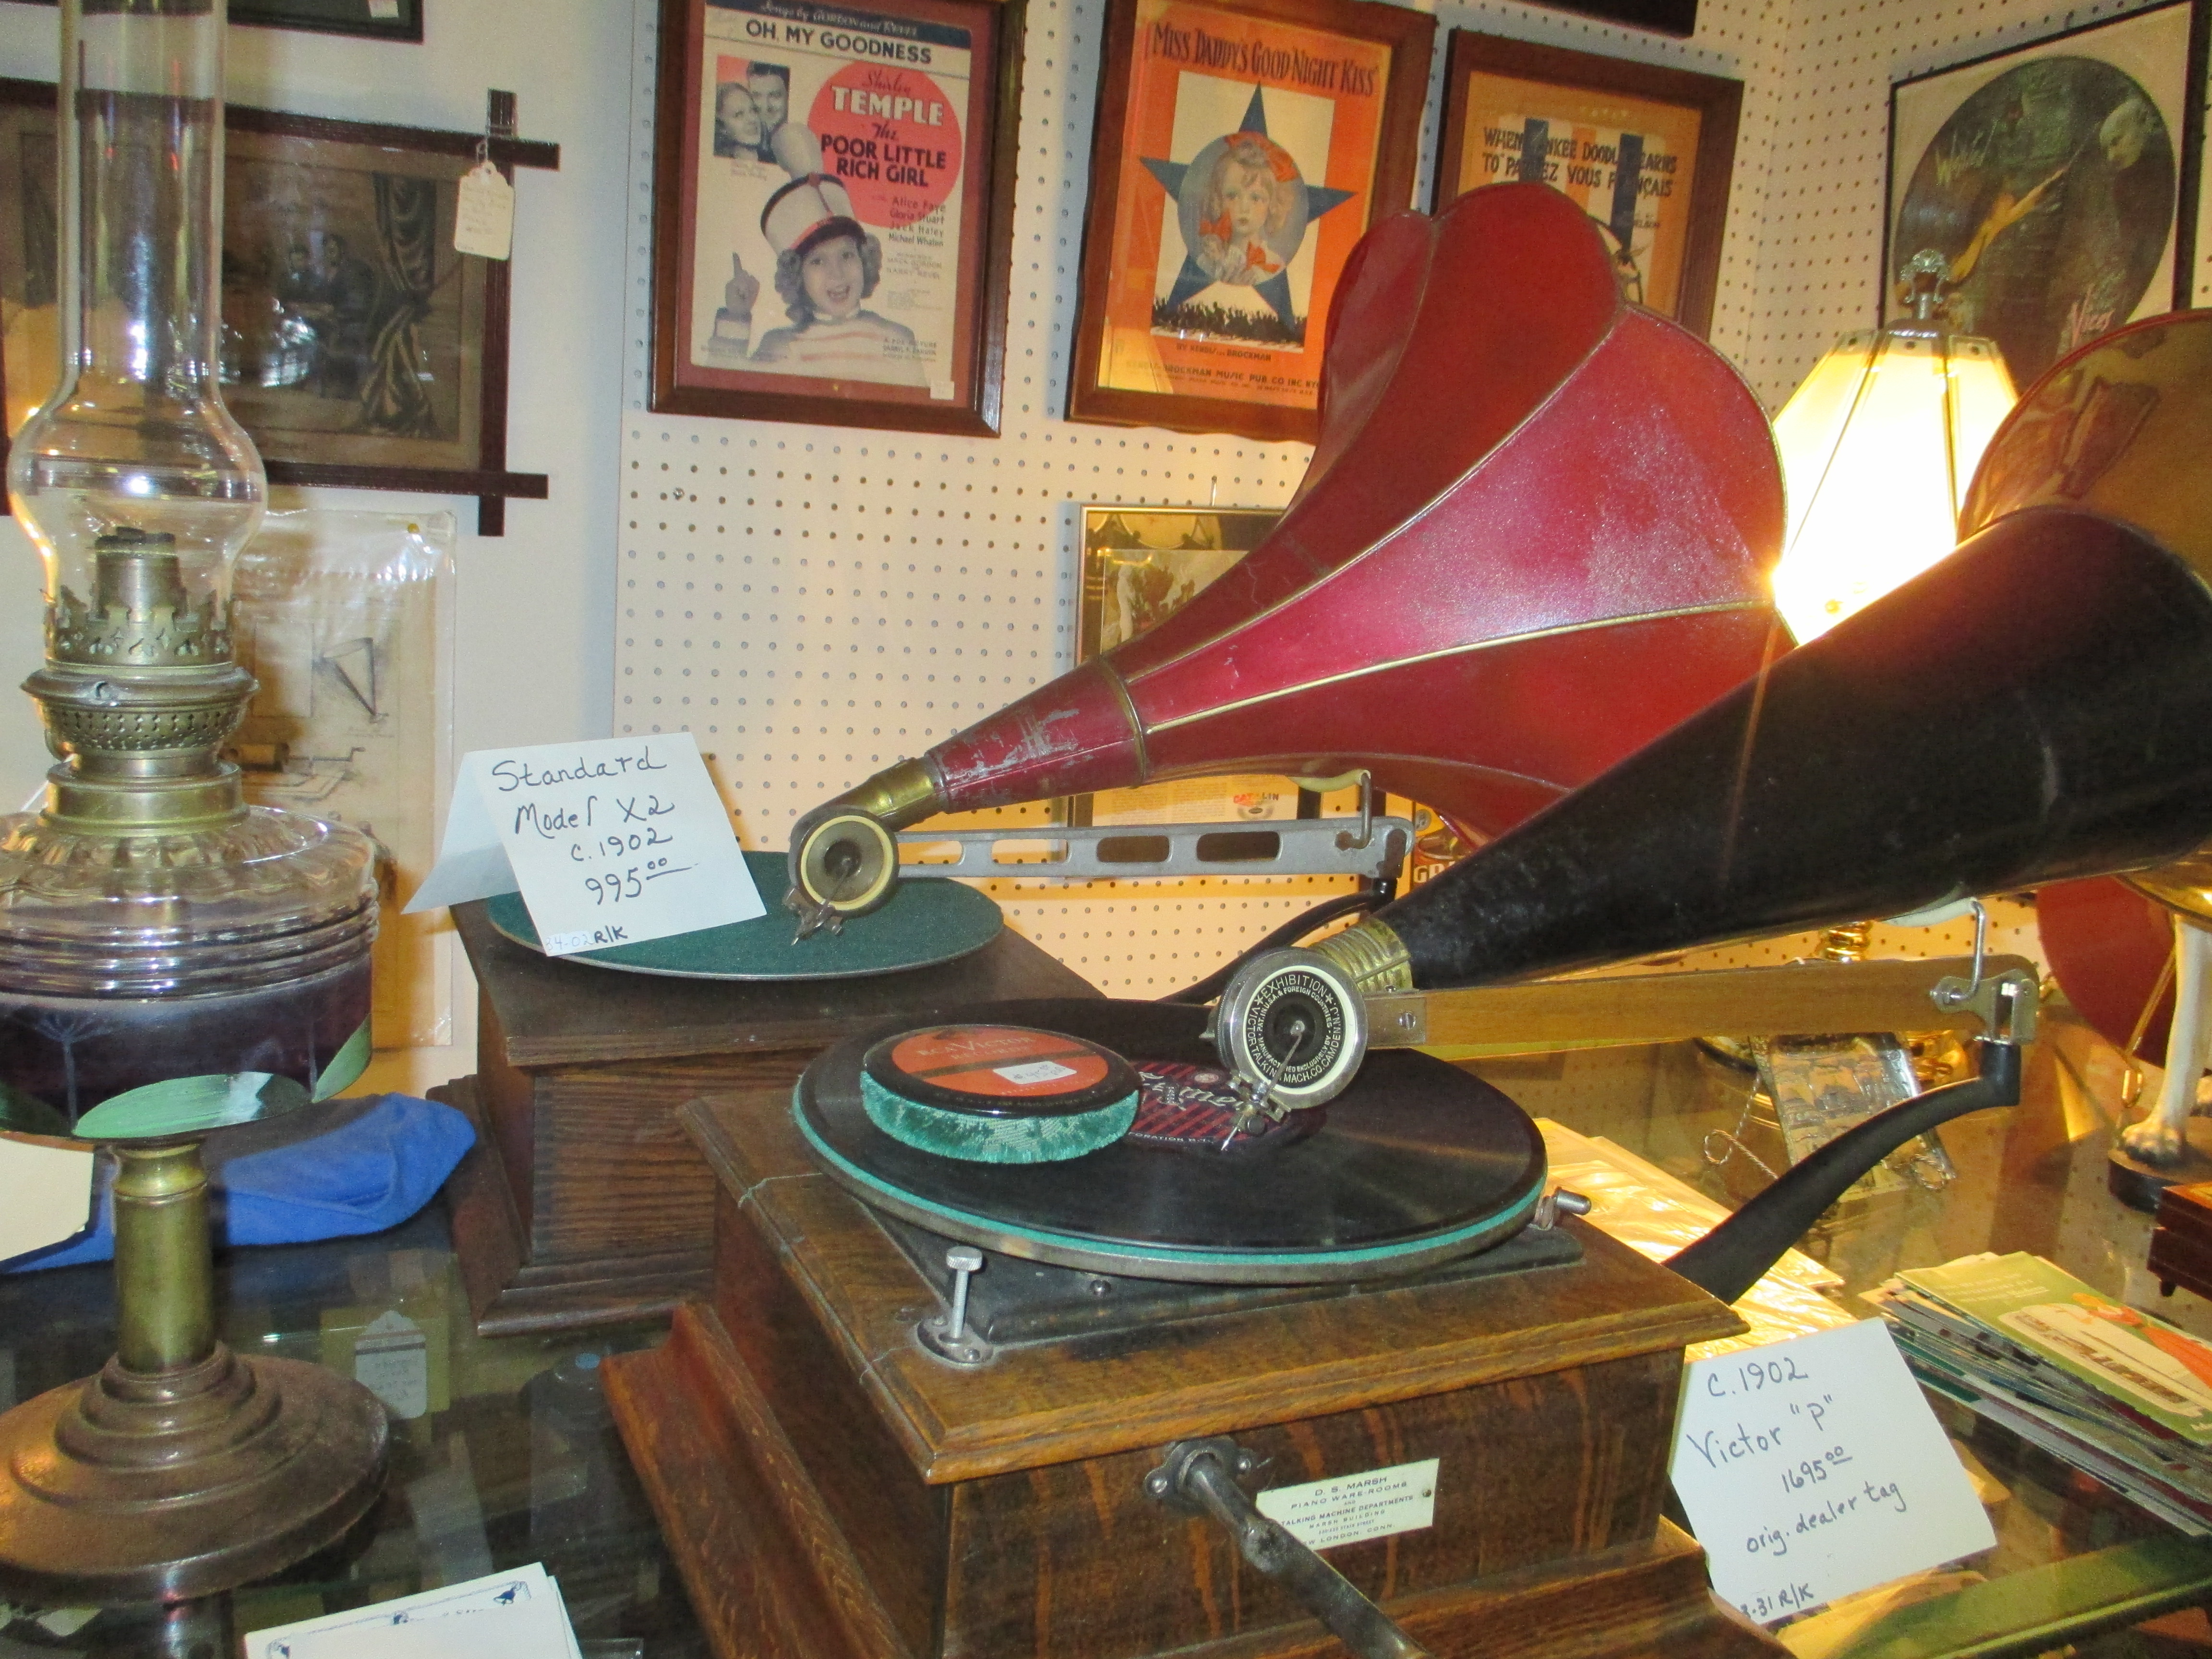 1902 Standard Talking Machine X-2 front mount with small spindle turntable $995